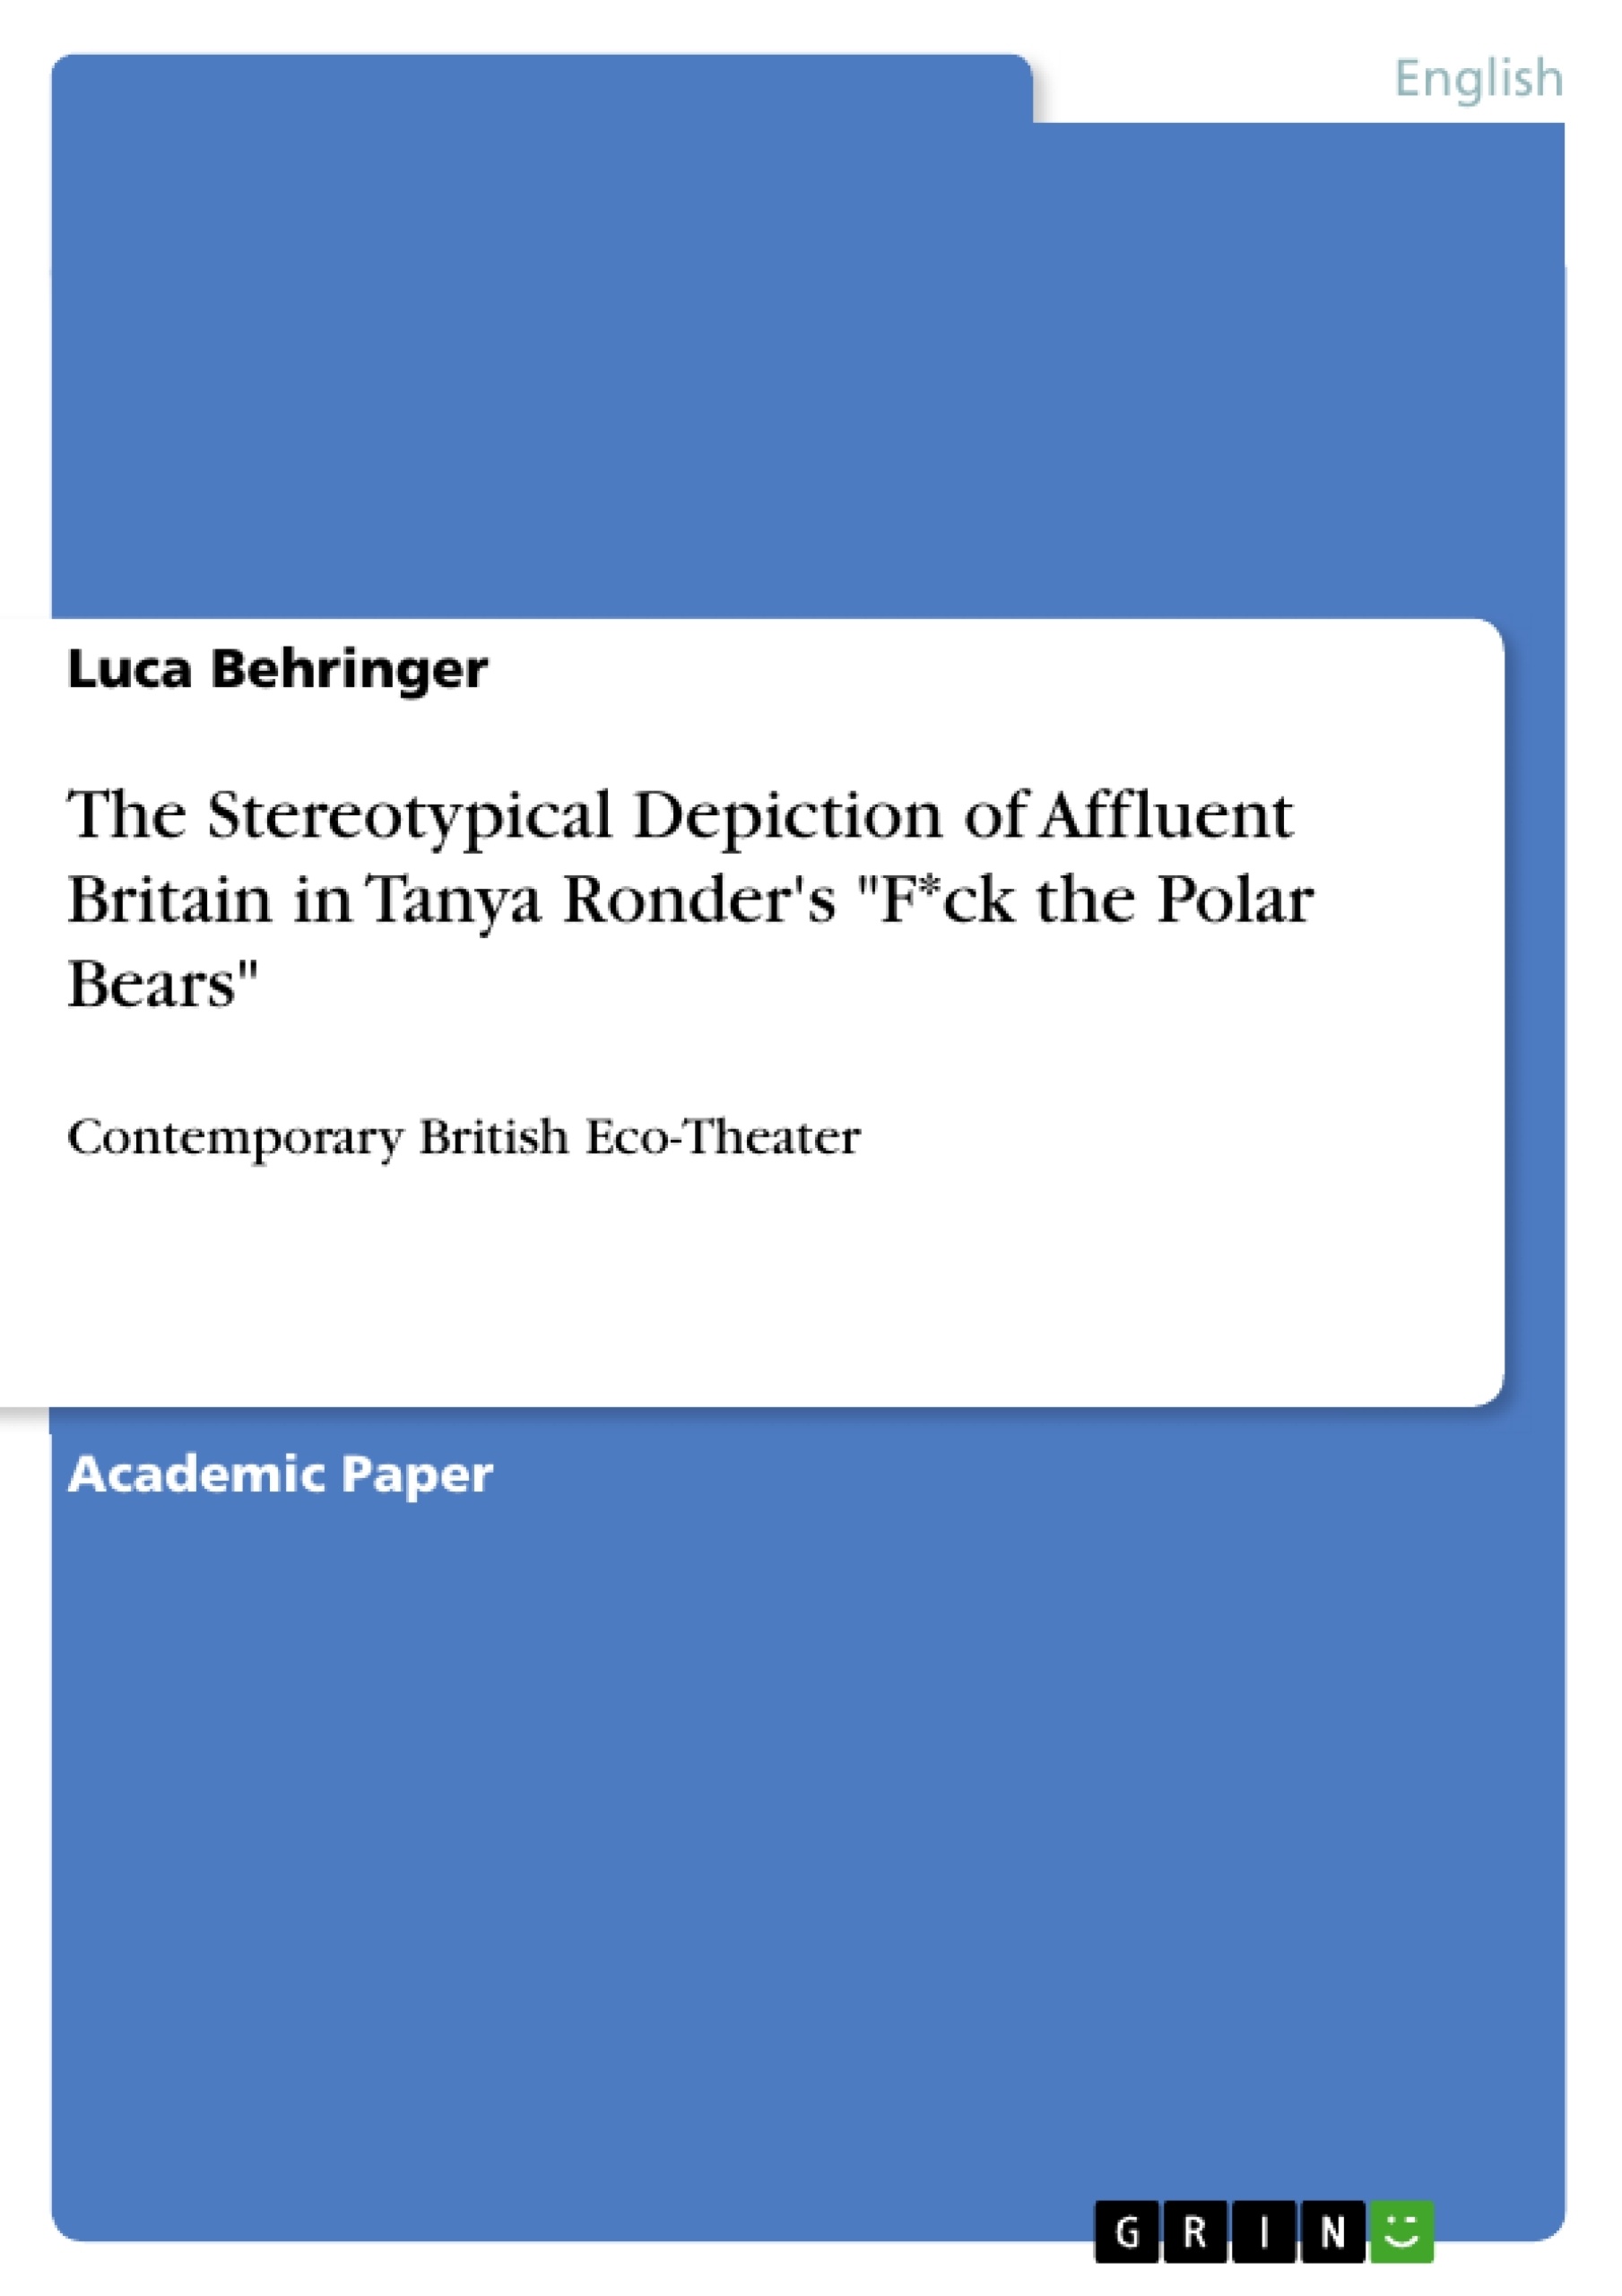 Titre: The Stereotypical Depiction of Affluent Britain in Tanya Ronder's "F*ck the Polar Bears"